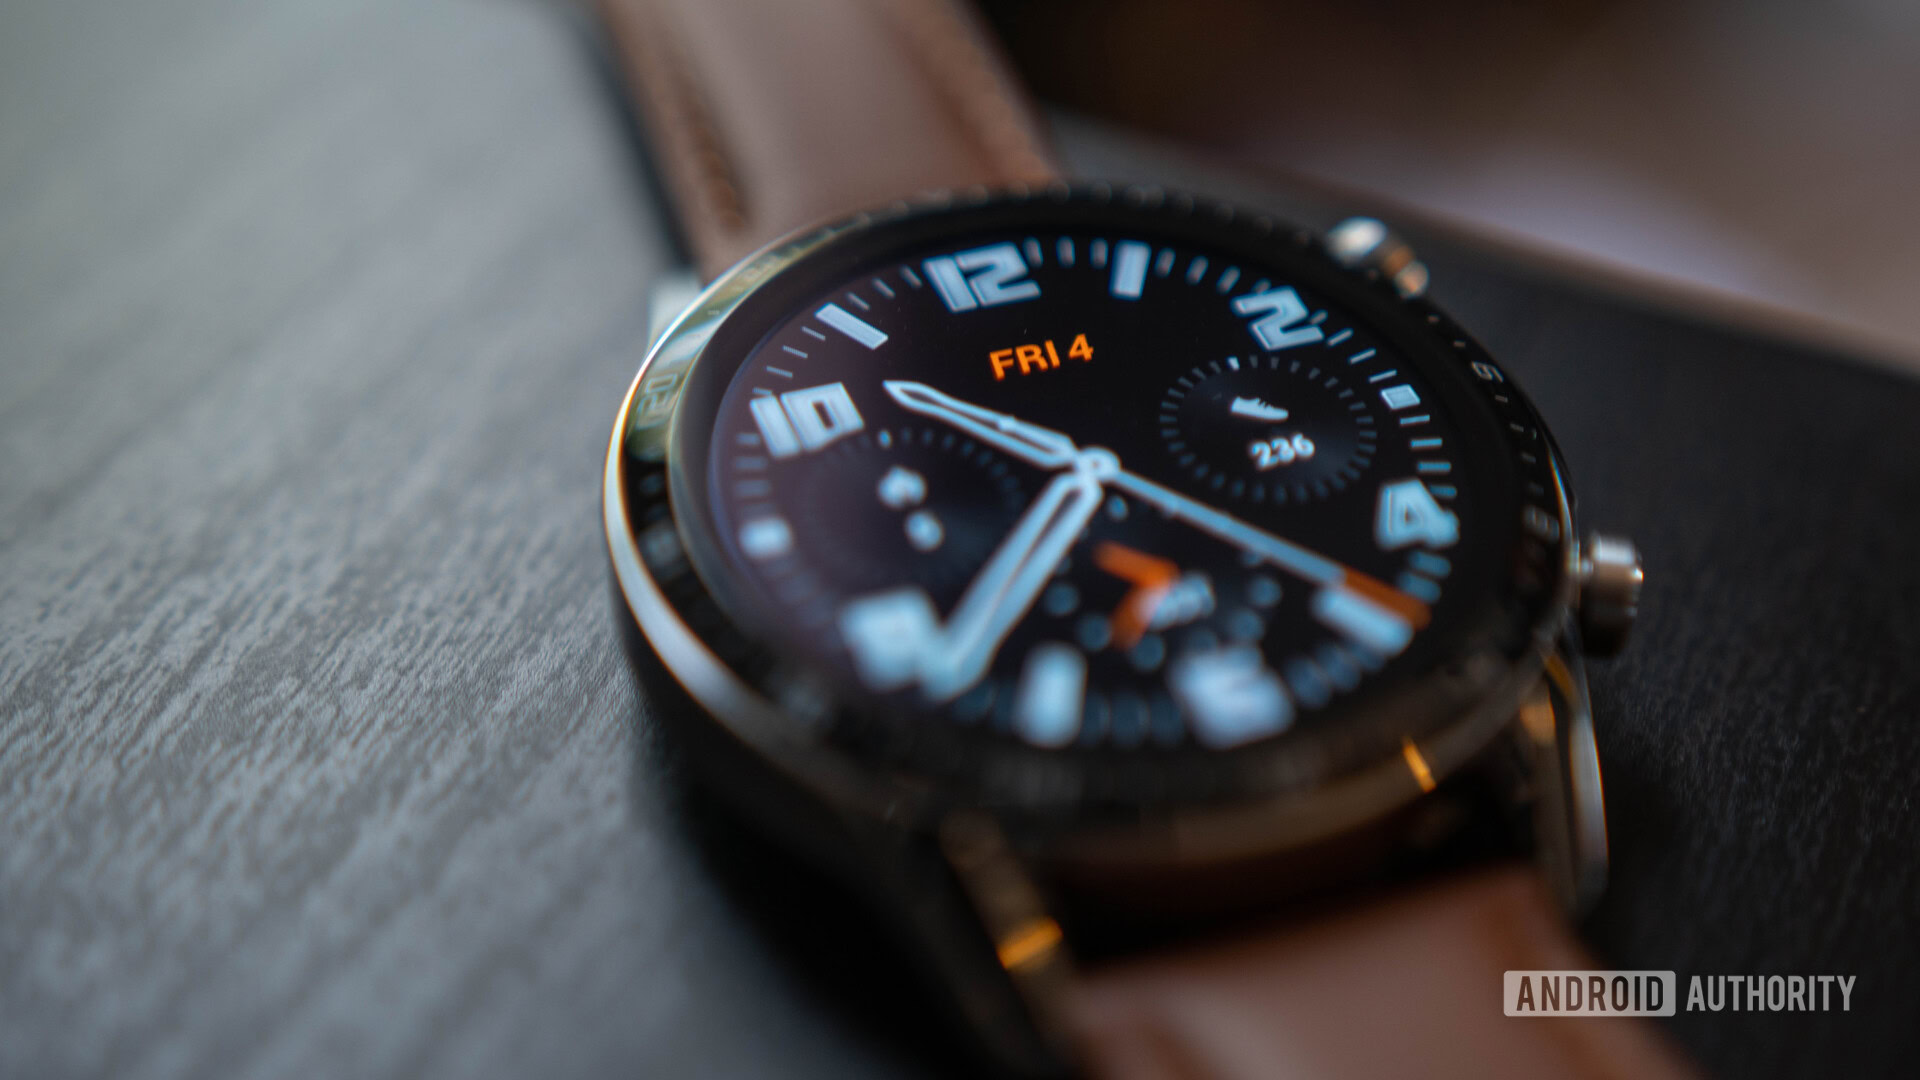 HUAWEI Watch GT 2 review: Great fitness tracker, limited smartwatch